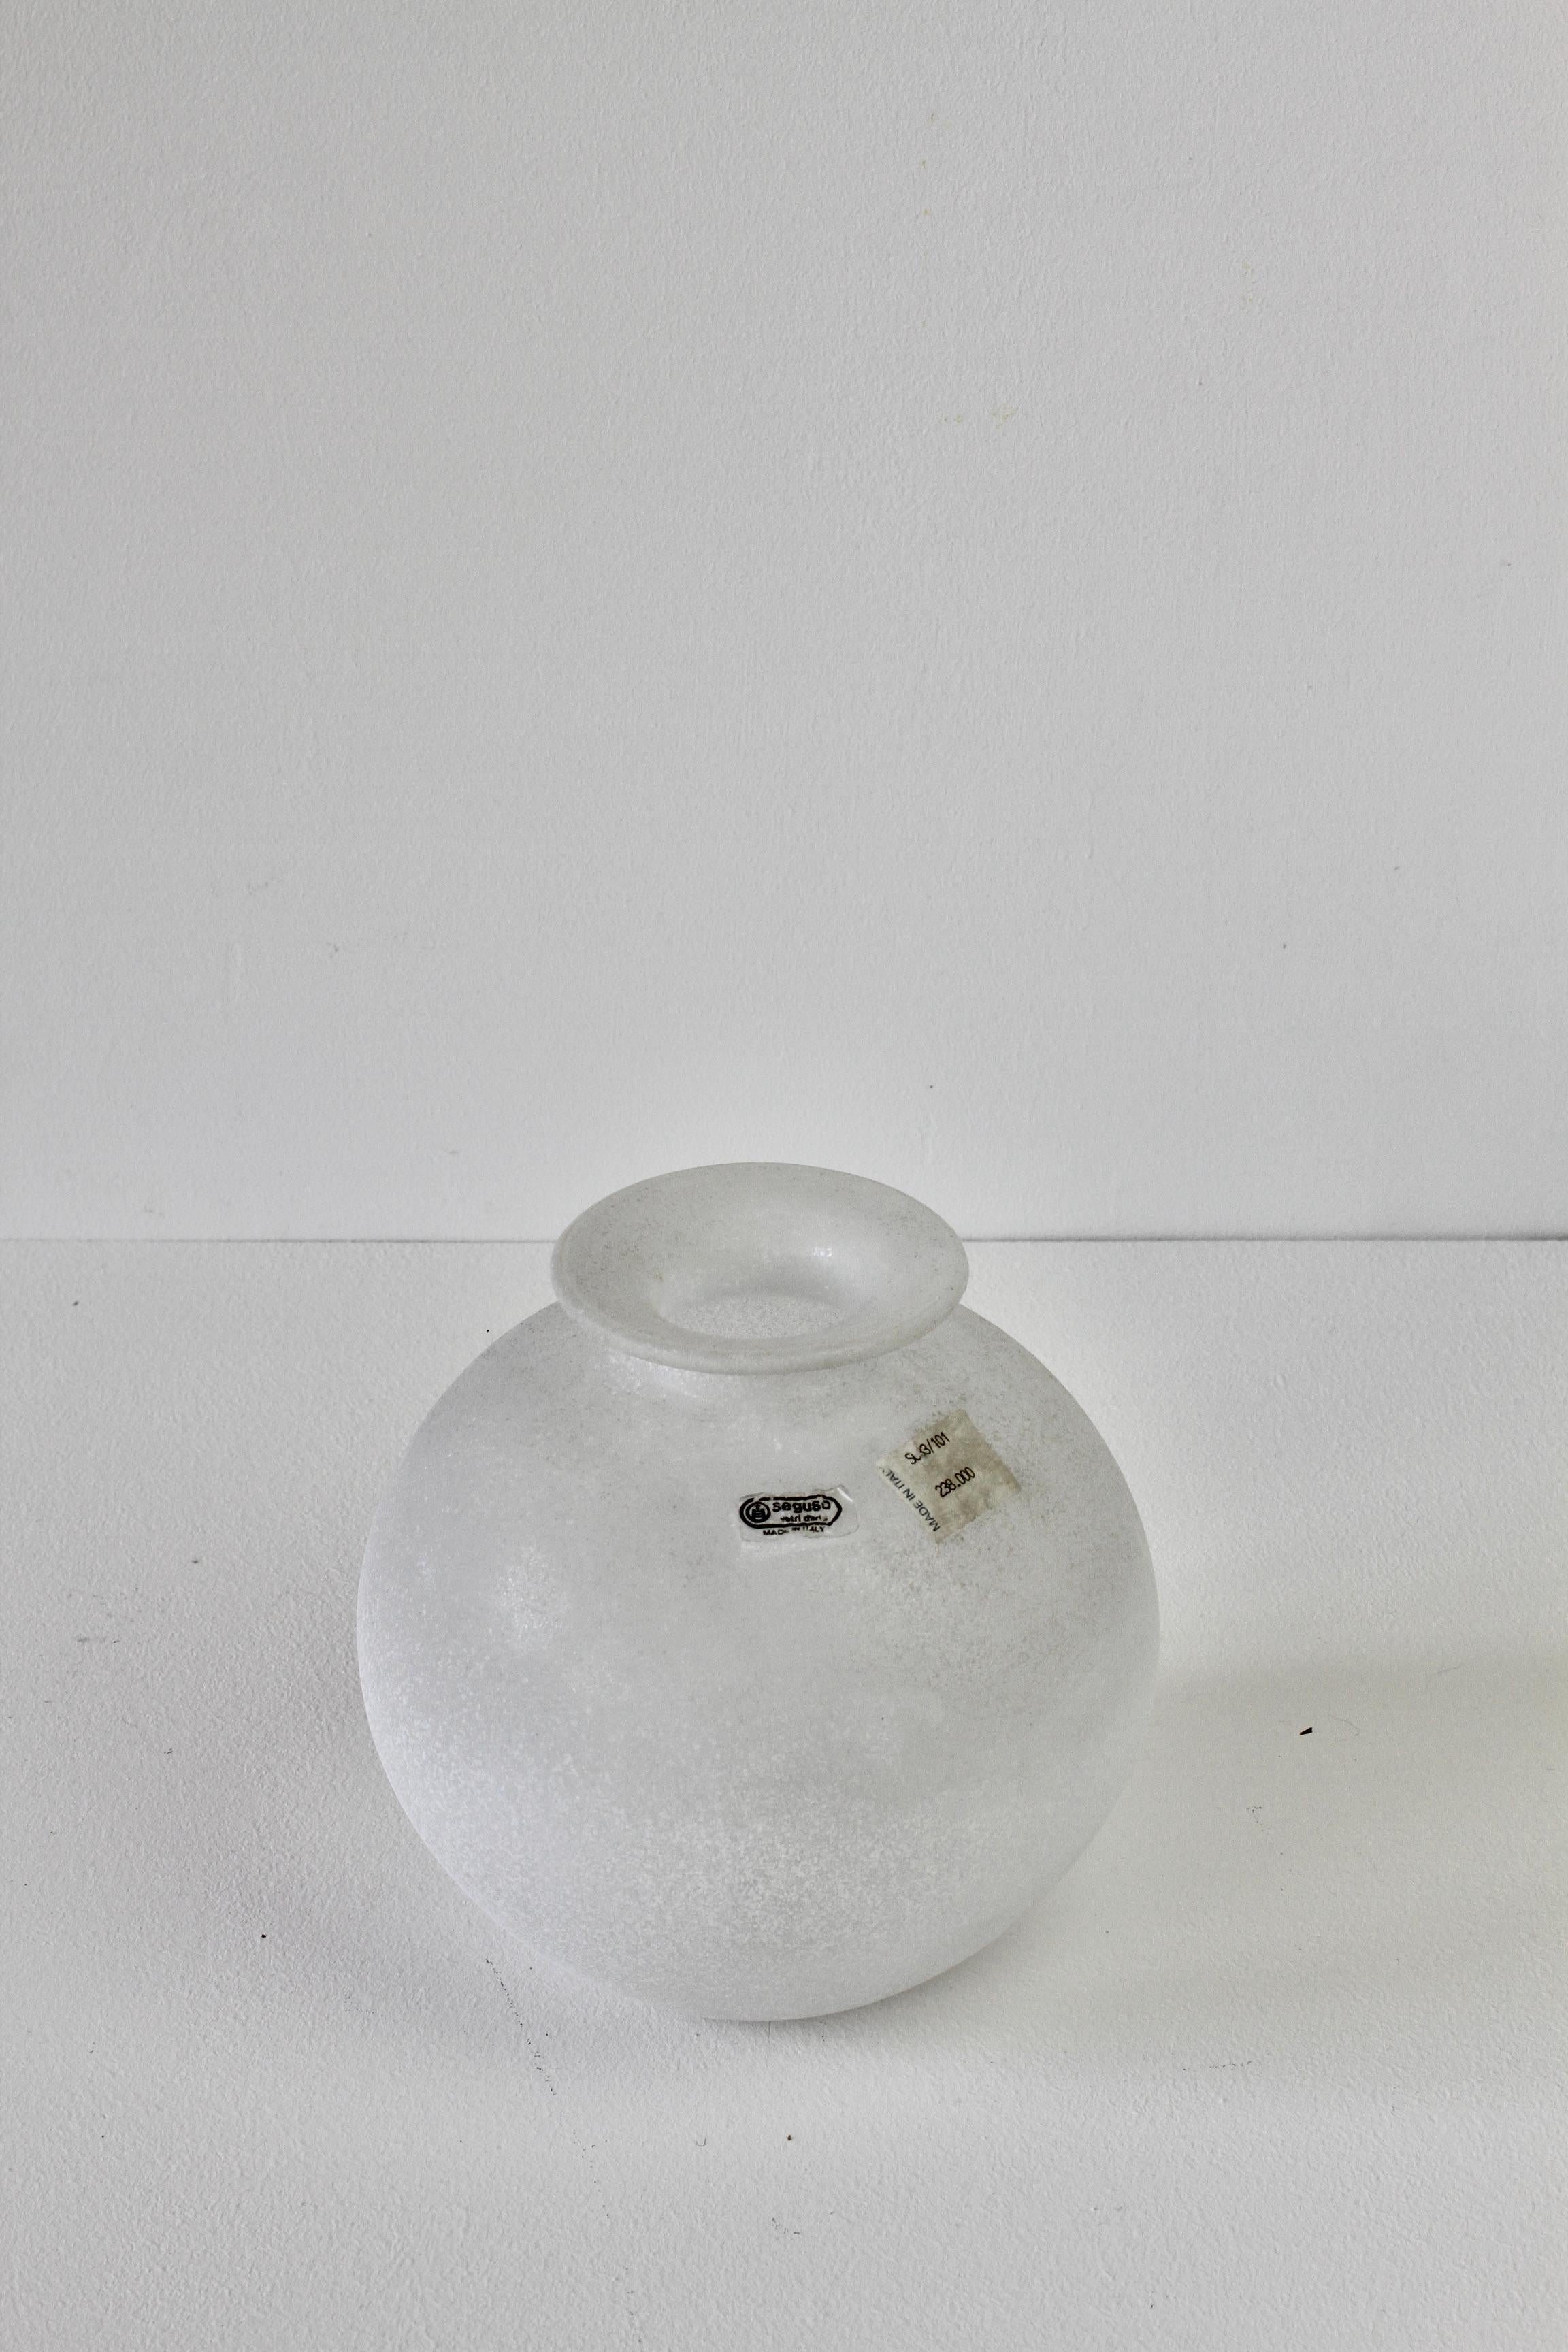 Elegant vintage round Italian 7.1 inch tall 'a Scavo' white colored / coloured glass vase by Seguso Vetri d'Arte Murano, Italy. Elegant in form and showing extraordinary craftsmanship with the use of the 'Scavo' technique to replicate to look and